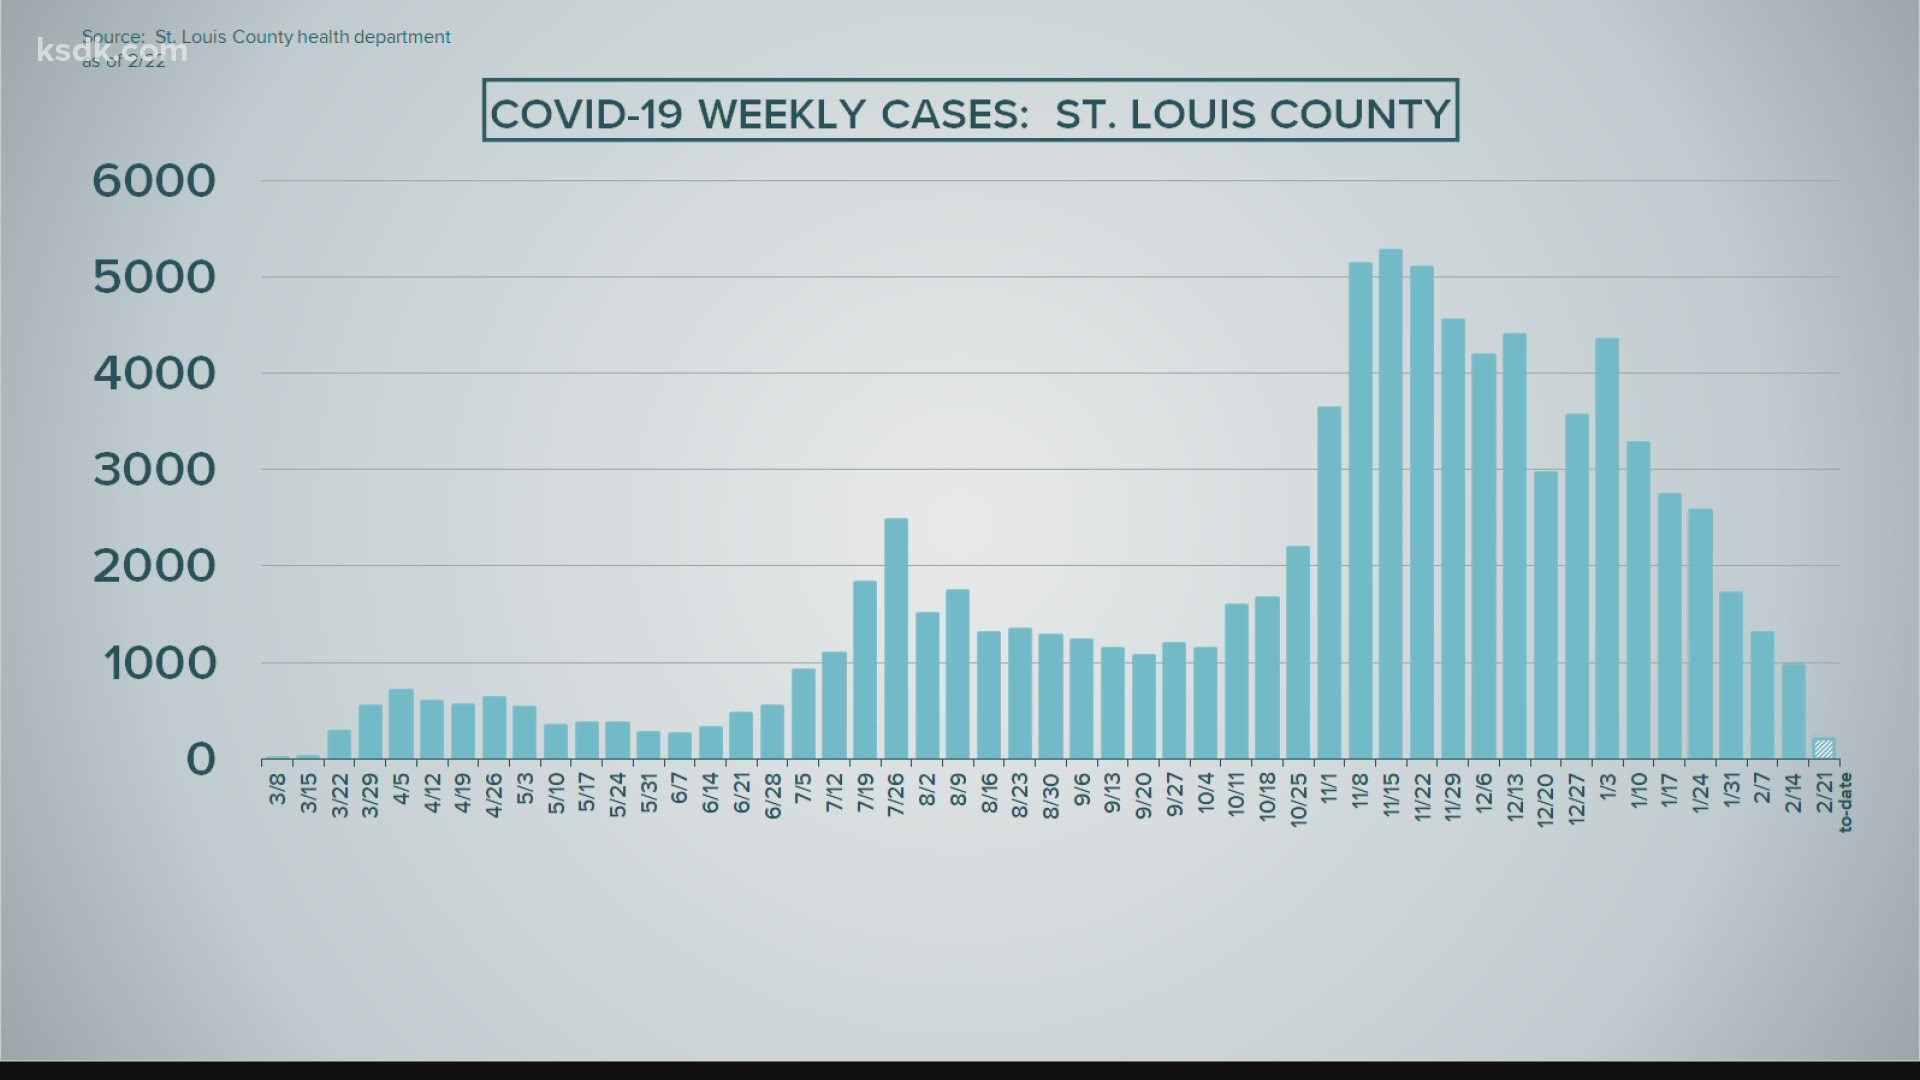 Only eight new cases of Covid-19 reported in the city of St. Louis Monday